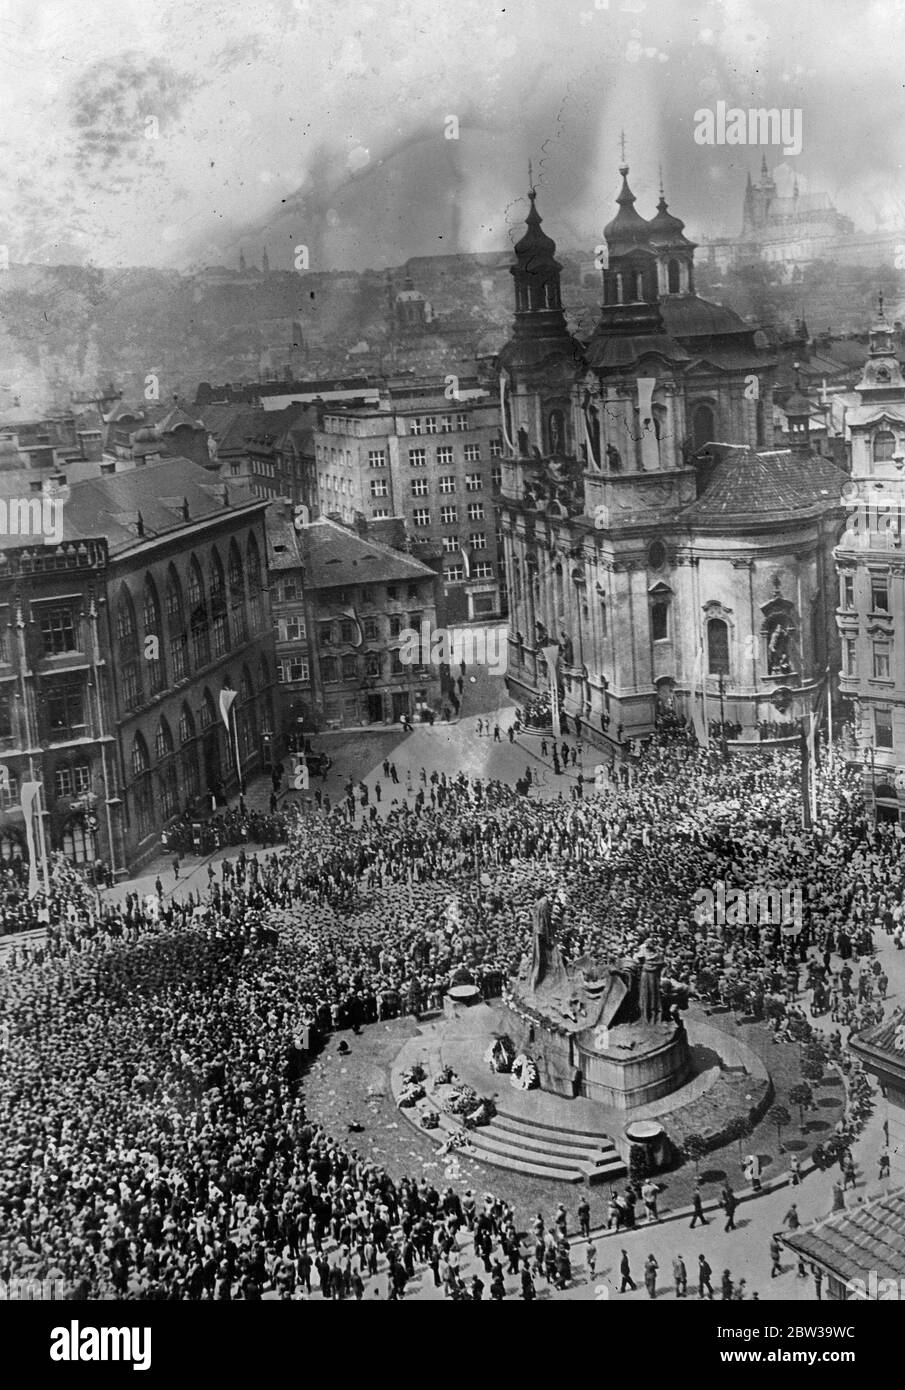 Czechoslovakian legionaries parade in third congress in Prague . Phot shows the remarkable scene in the Old Town Square of Prague during the ceremony . 9 July 1935 Stock Photo